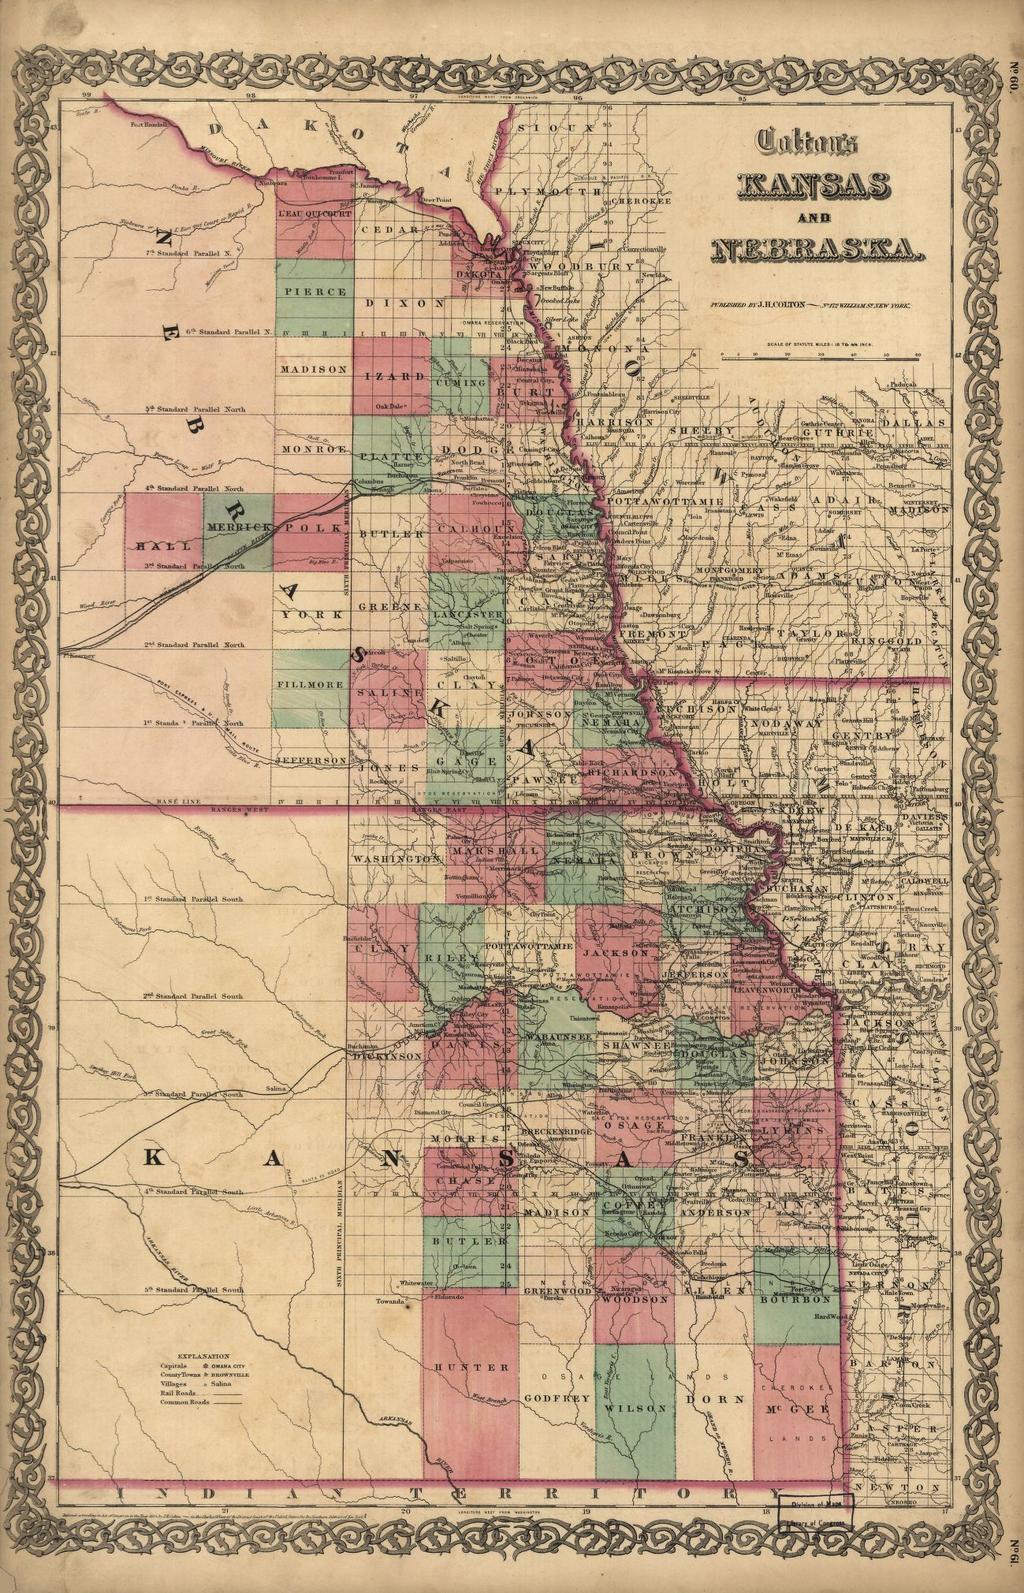 Jim McKee: When southern Nebraska tried to secede and join Kansas In 1856, J. Sterling Morton argued that the move would be in the best interests of Nebraska, Kansas and the United States.